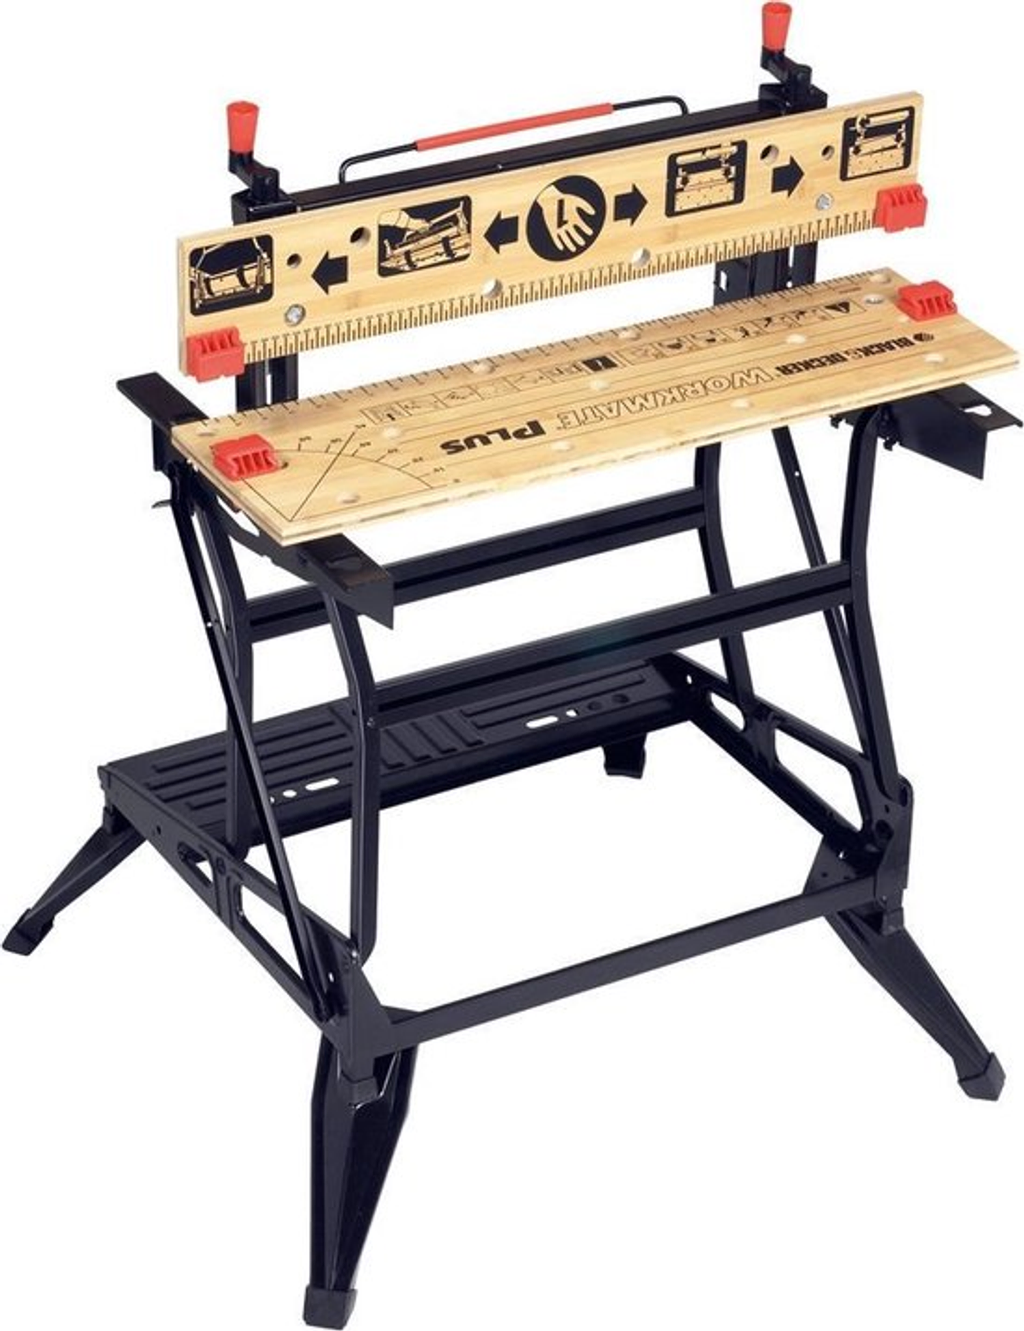 Rent the Black & Decker foldable workbench with clamps and adjustable height at BIYU for your DIY project at home!